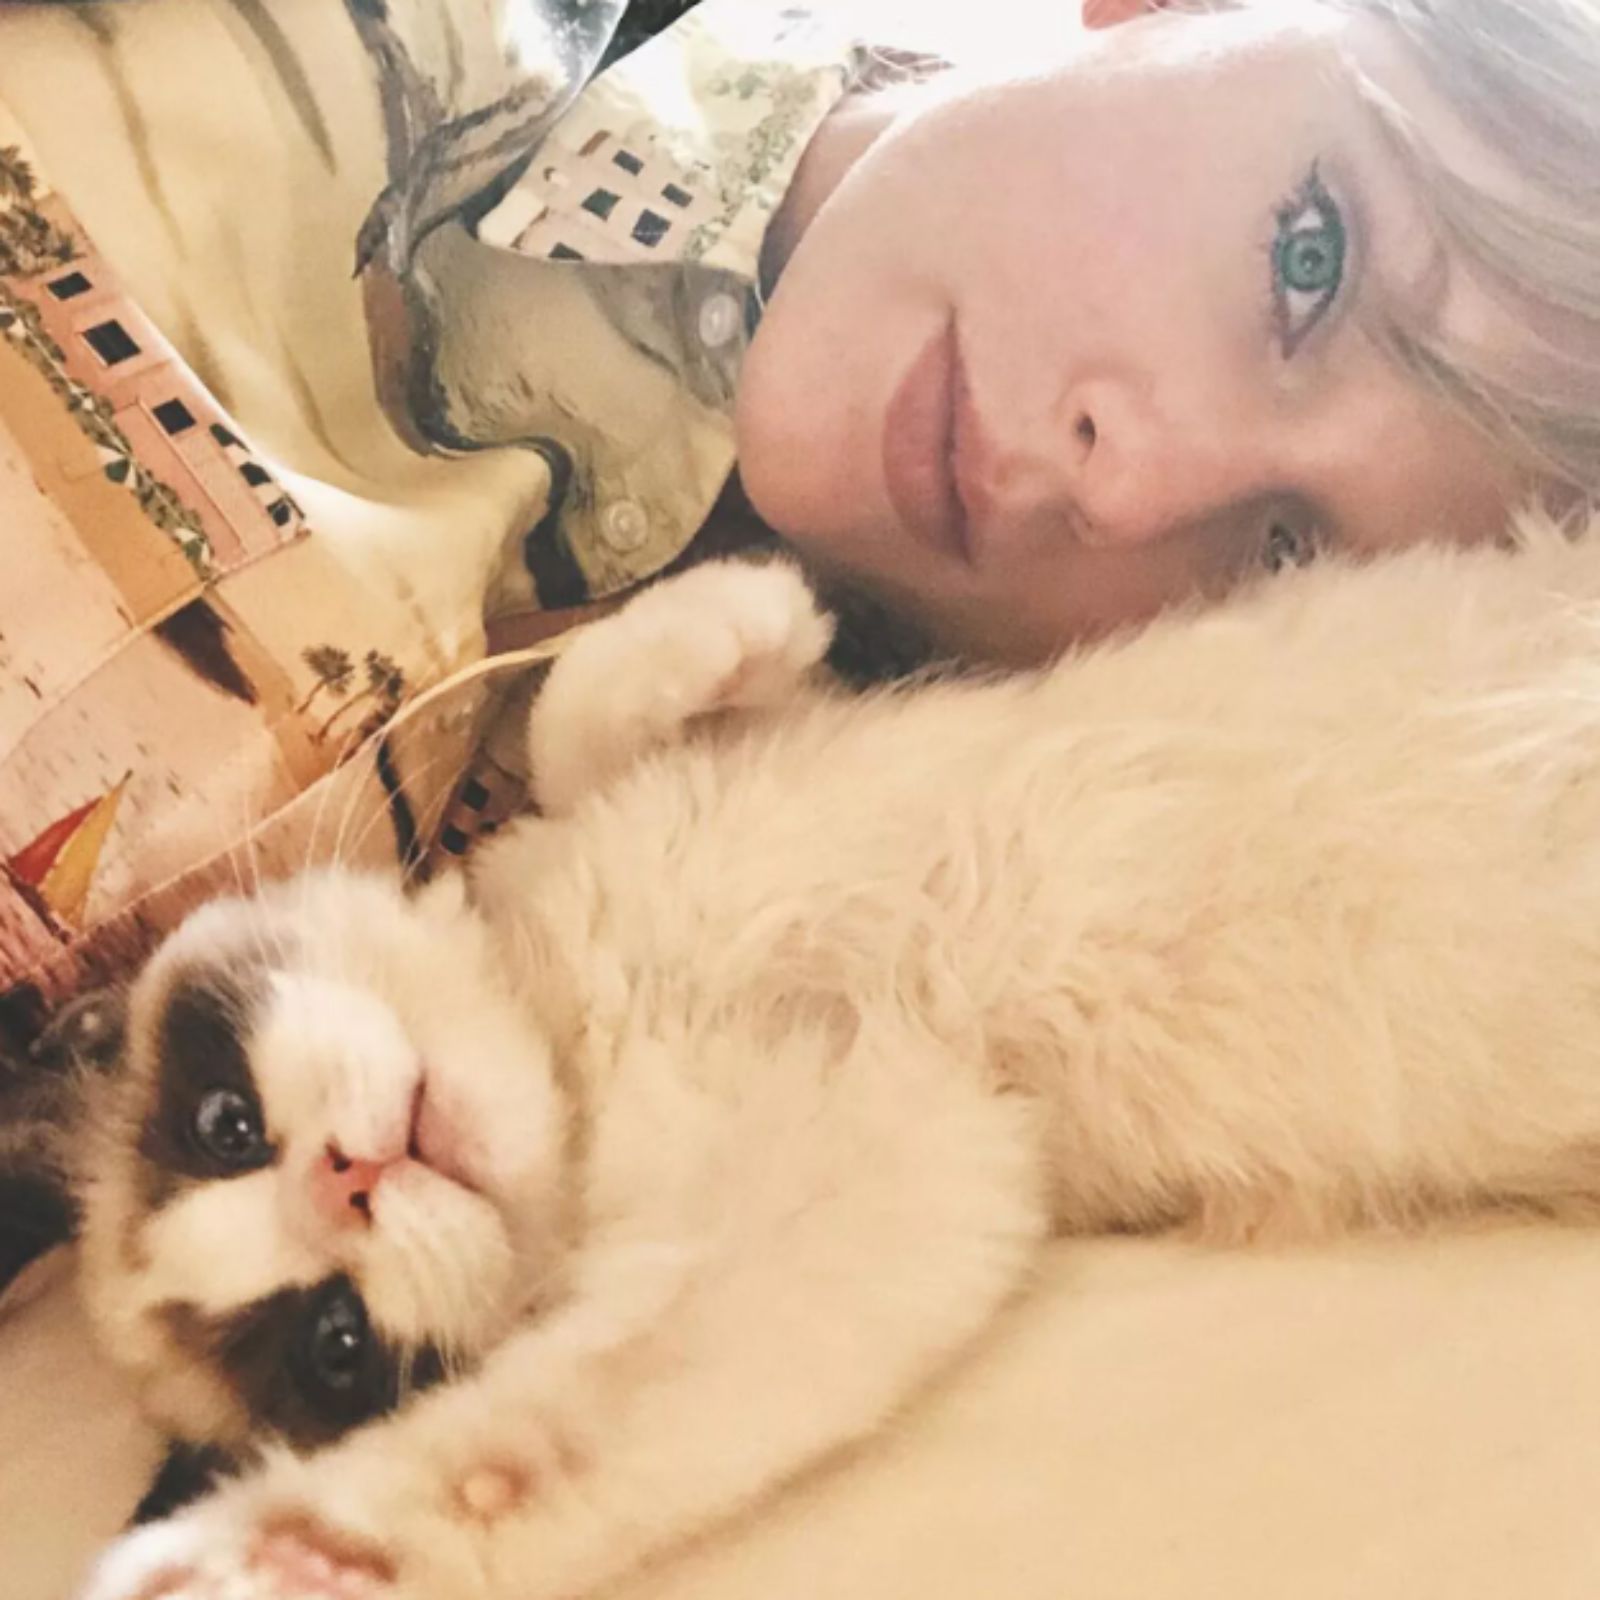 photo of taylor swift lying with a cat